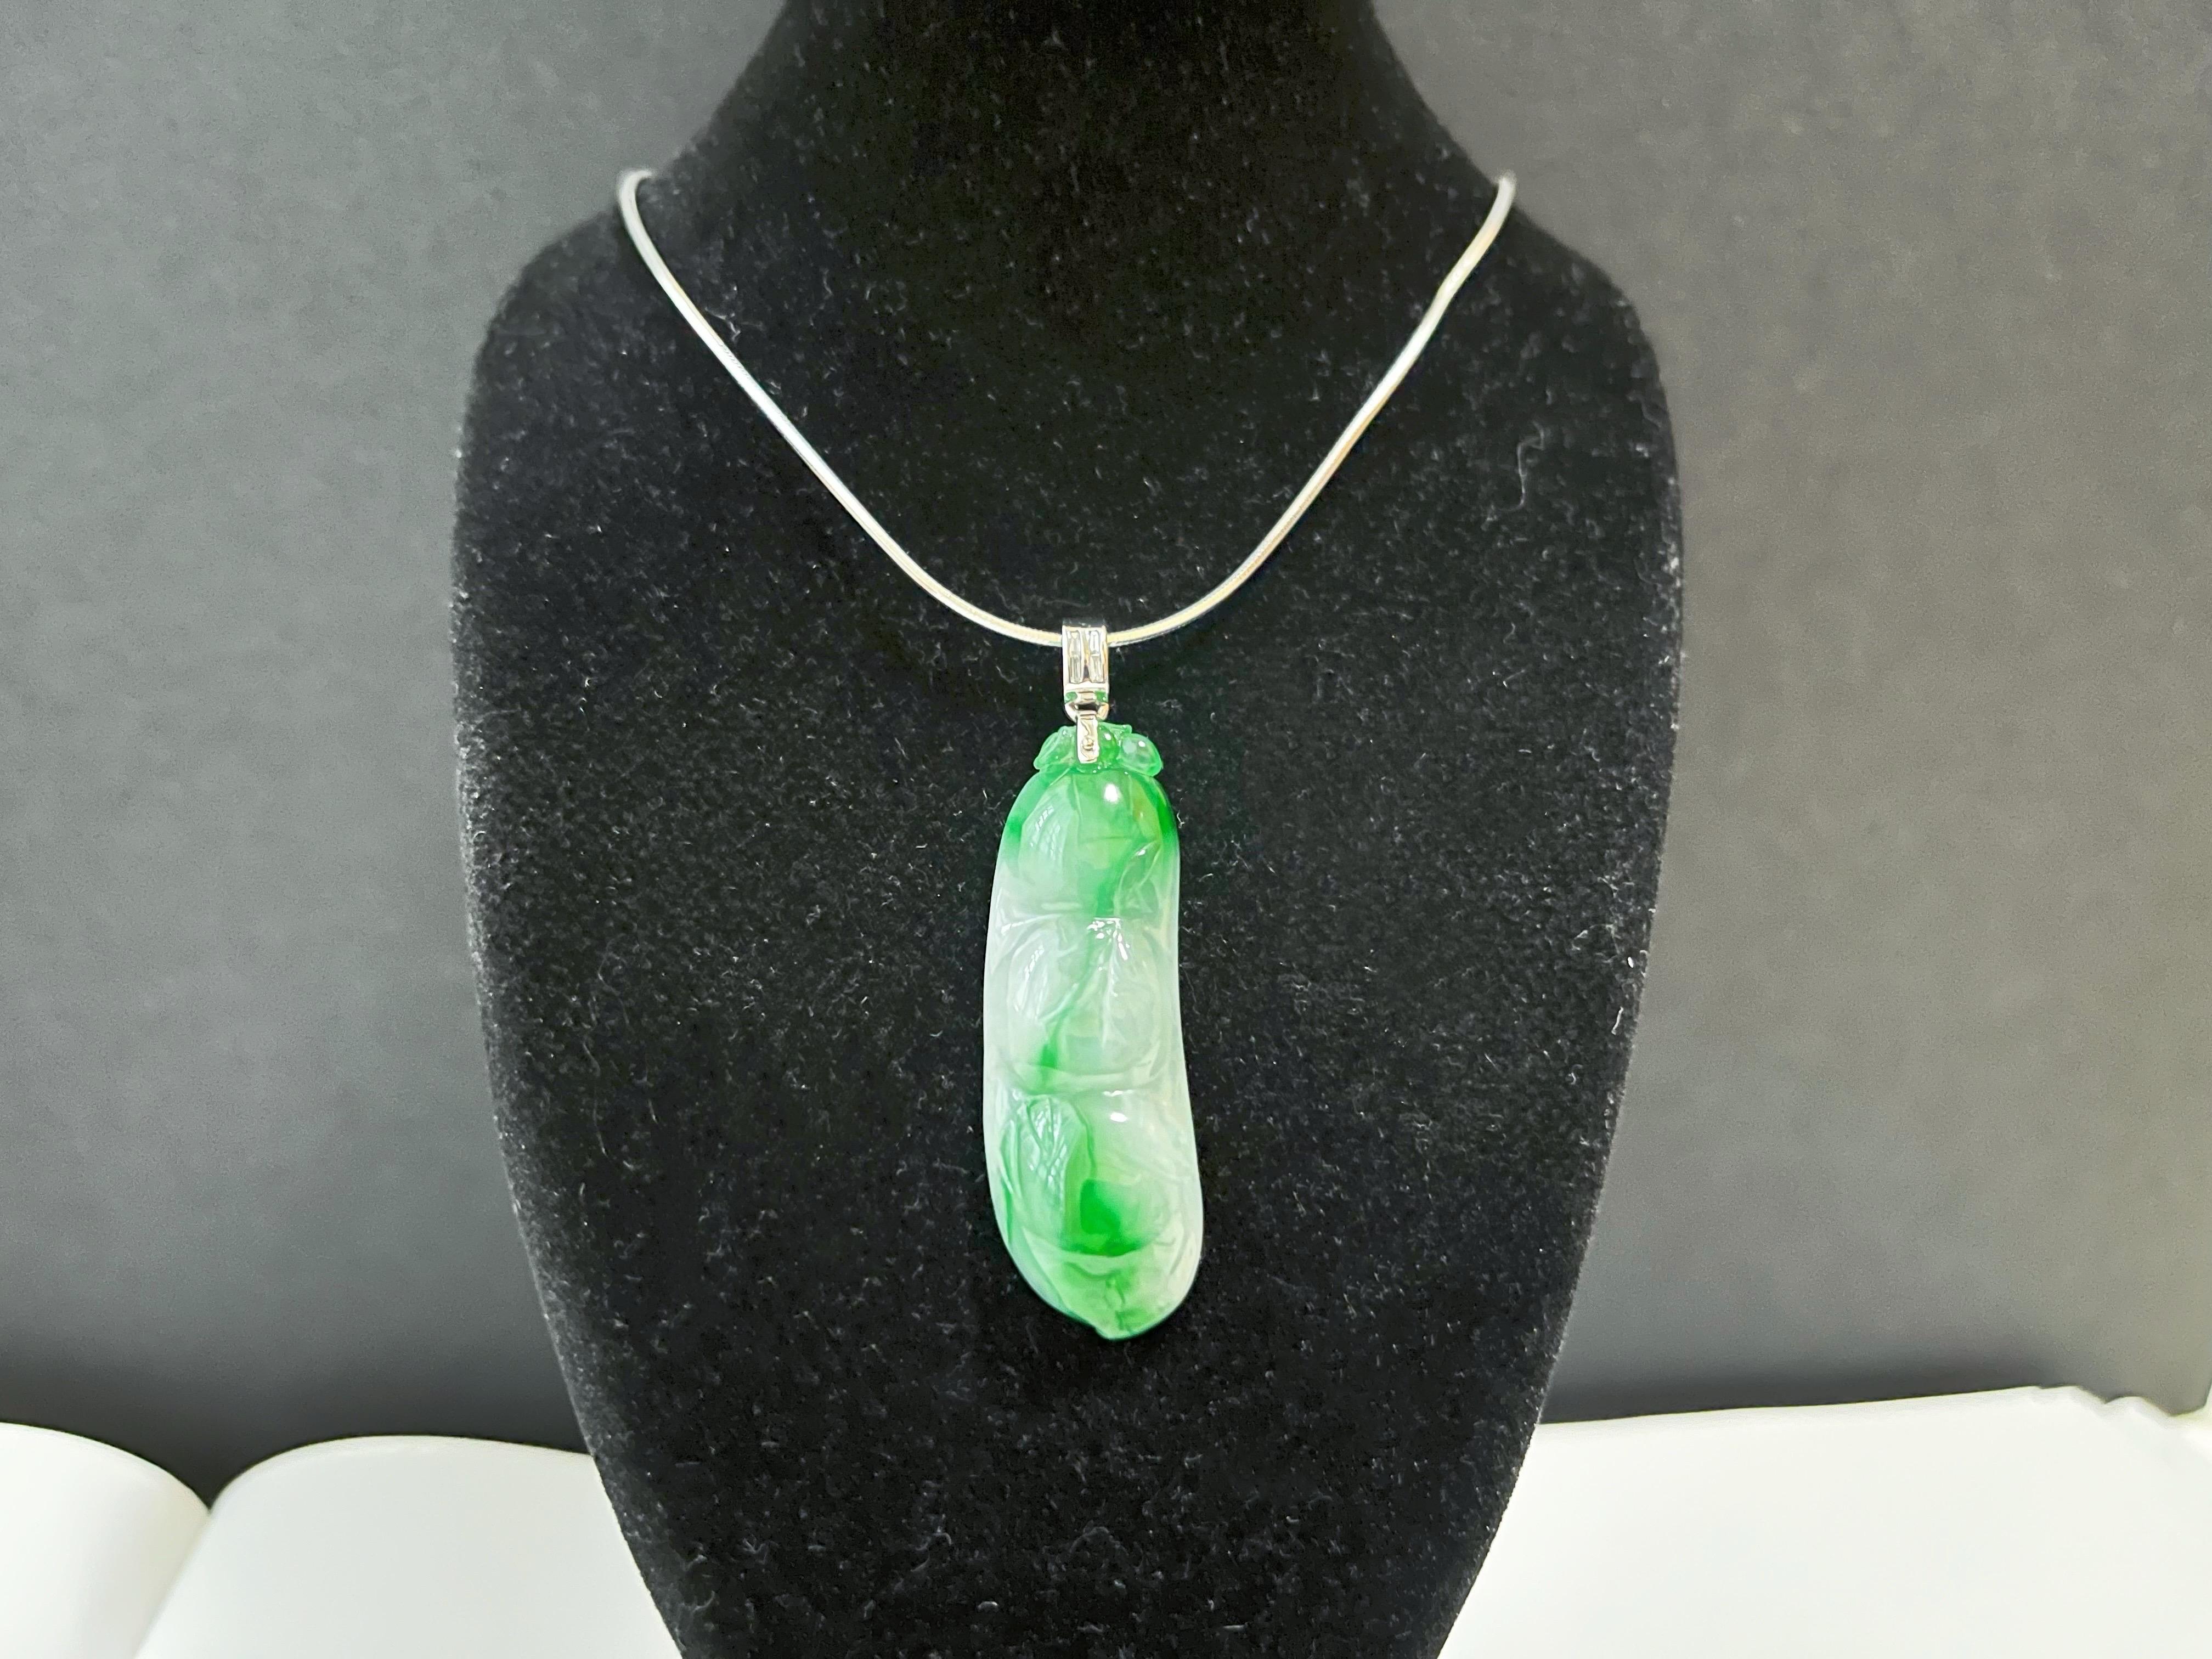 This jade pendant is 100% natural, untreated, and undyed Type-A Myanmar jadeite jade. It is hand-carved into a pea pod. There are three peas in a pod carved to look like a green bean, symbolizing luck, prosperity, and longevity. Beautiful vivid